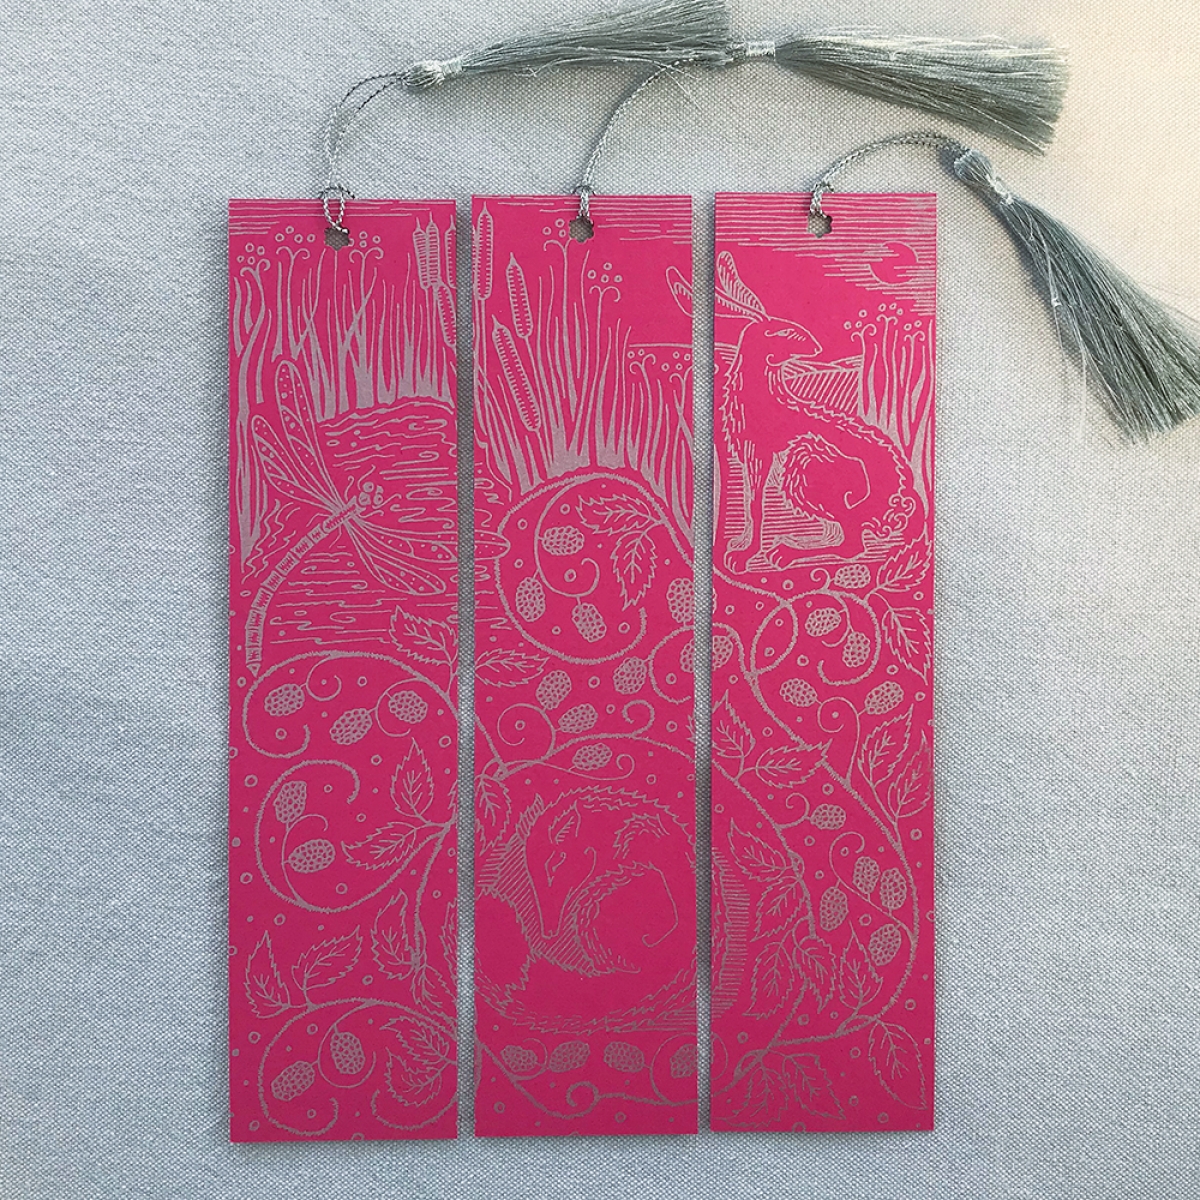 Nature Intertwined Hand Printed Triptych Bookmarks Fuschia Silver